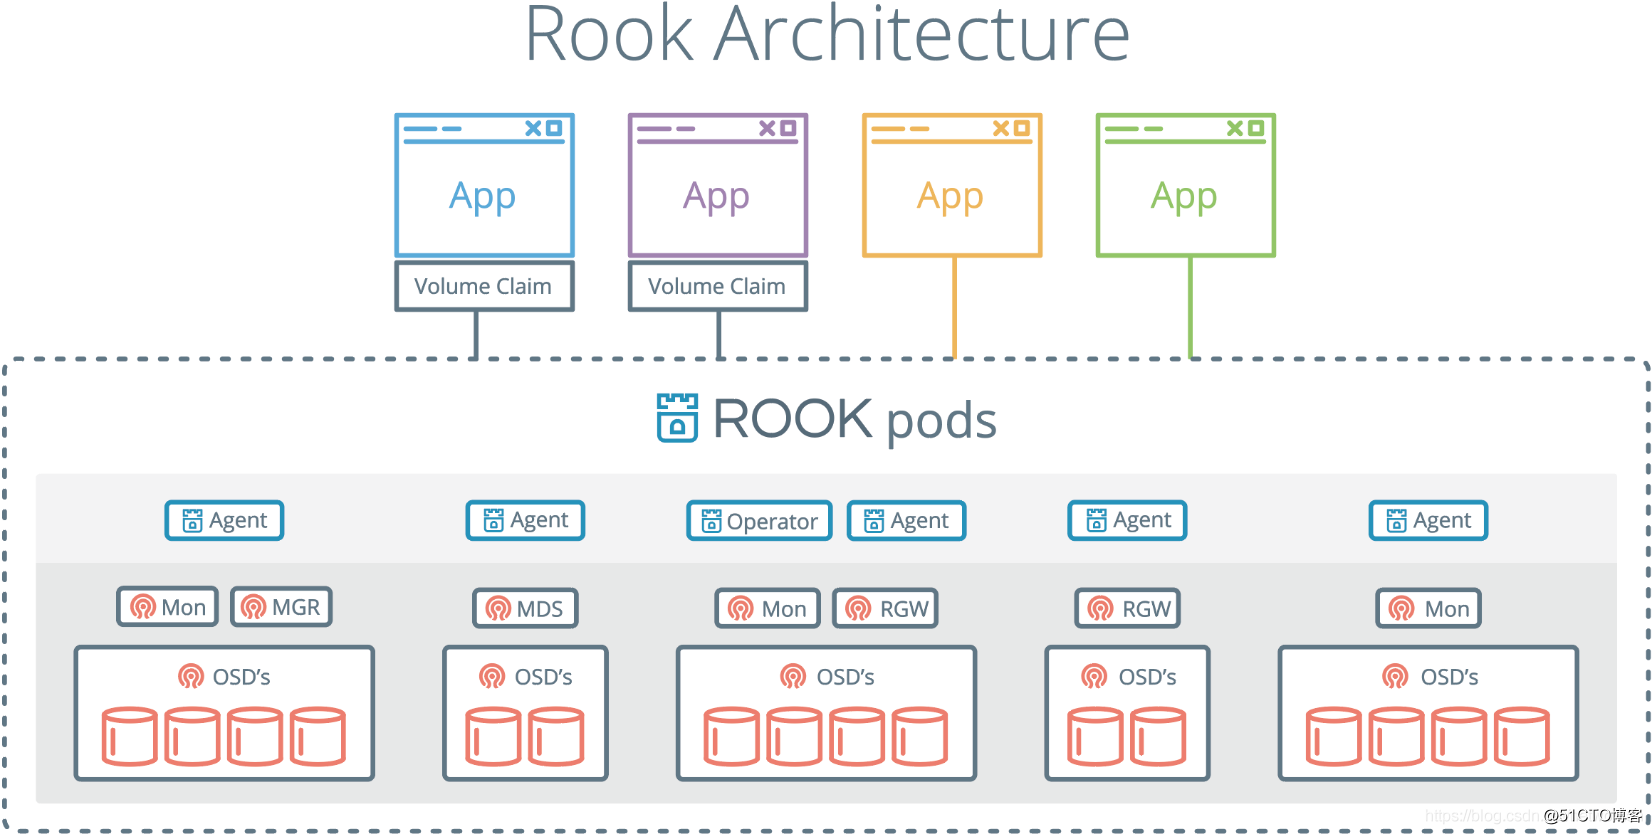 k8s cluster deployment and use of rook-ceph storage system